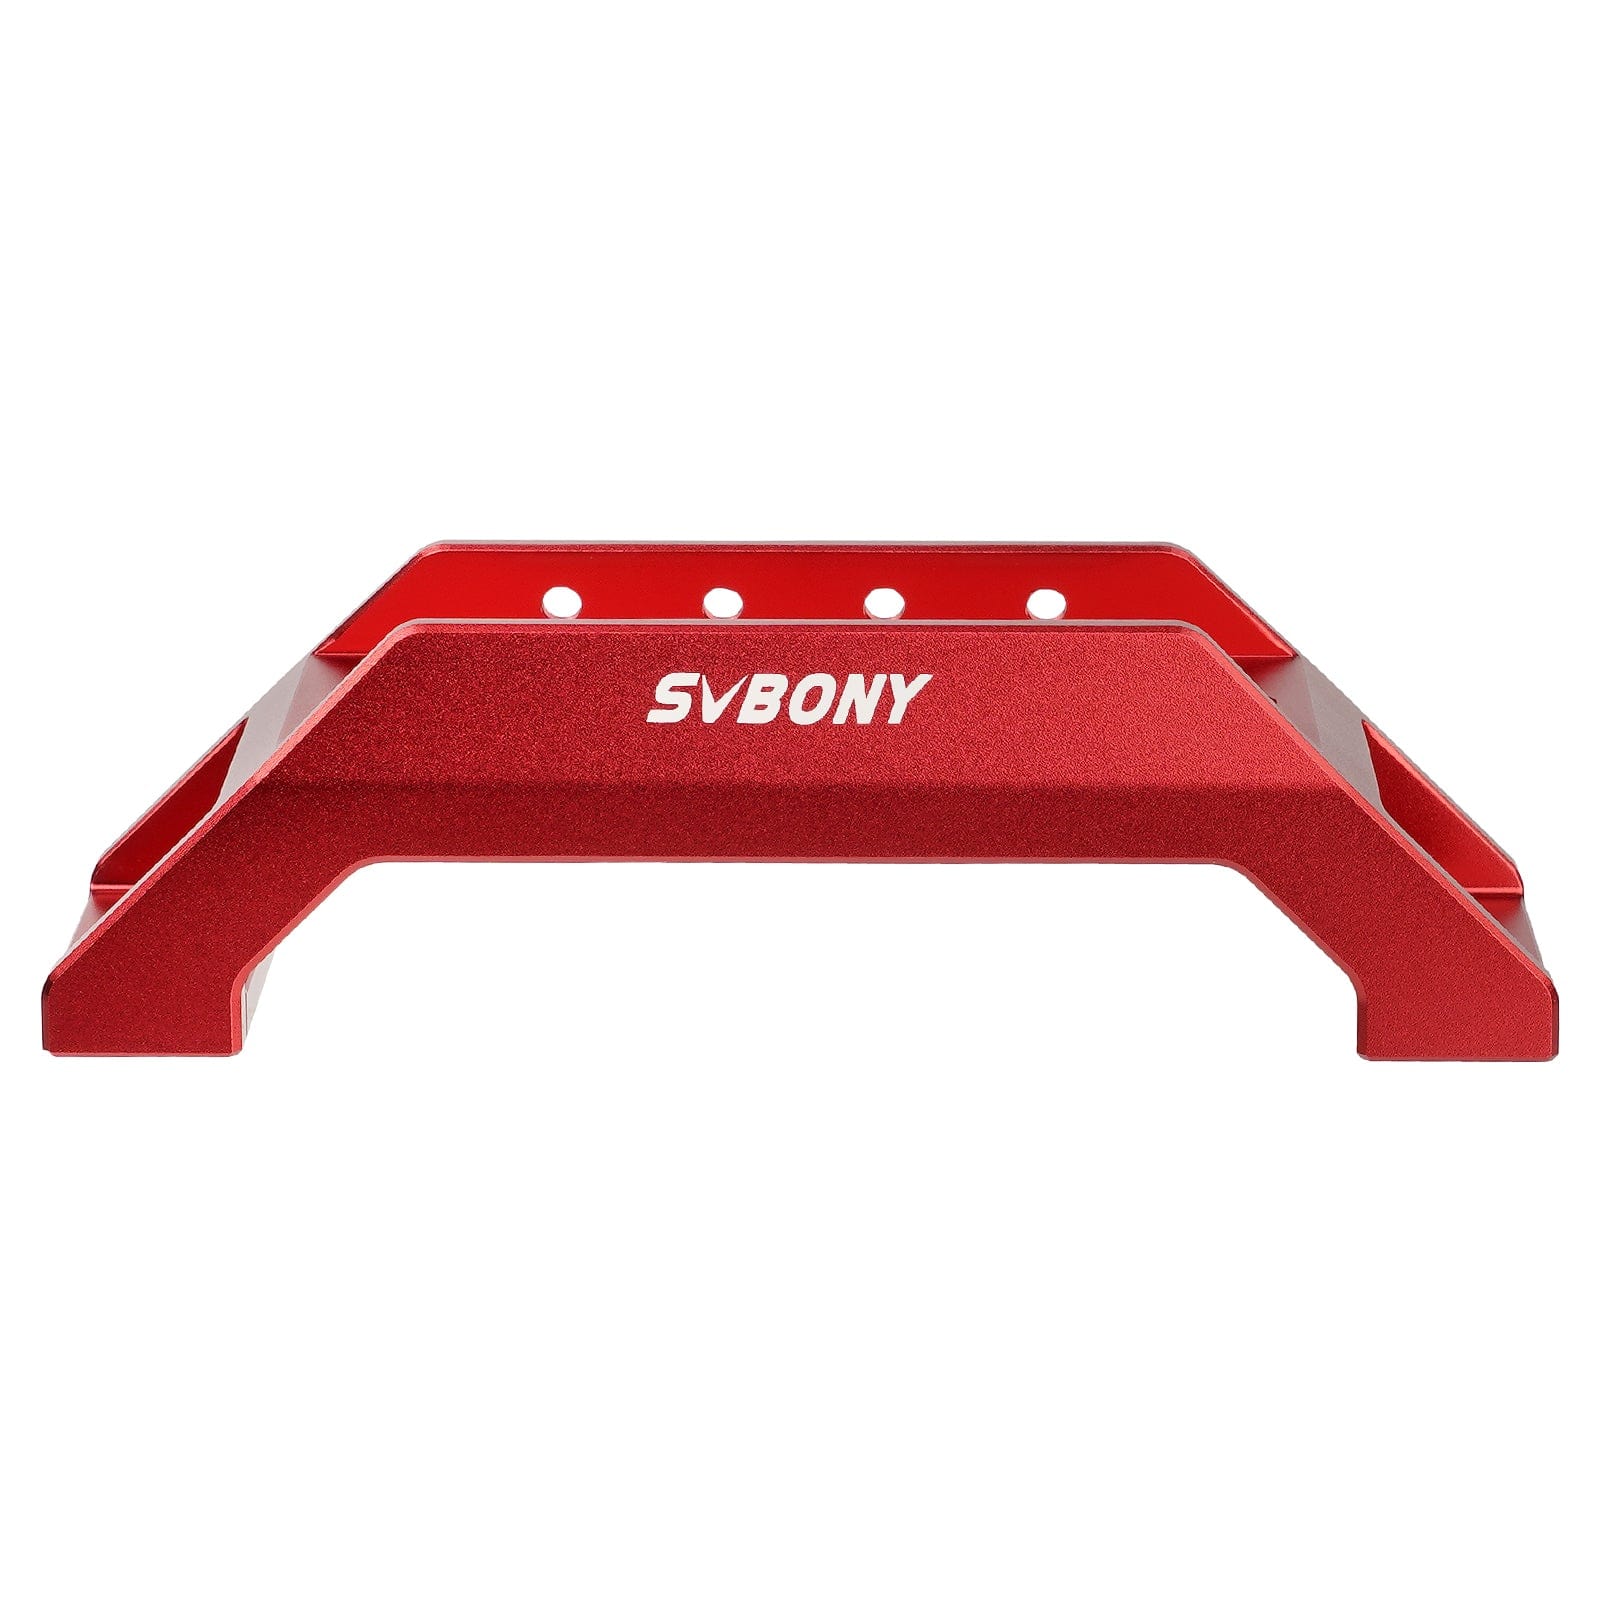 Svbony Accessory SVBONY SV211 135mm Handle Bar Guide Scope/ Finder Dovetail Mount for Telescope - W9163A